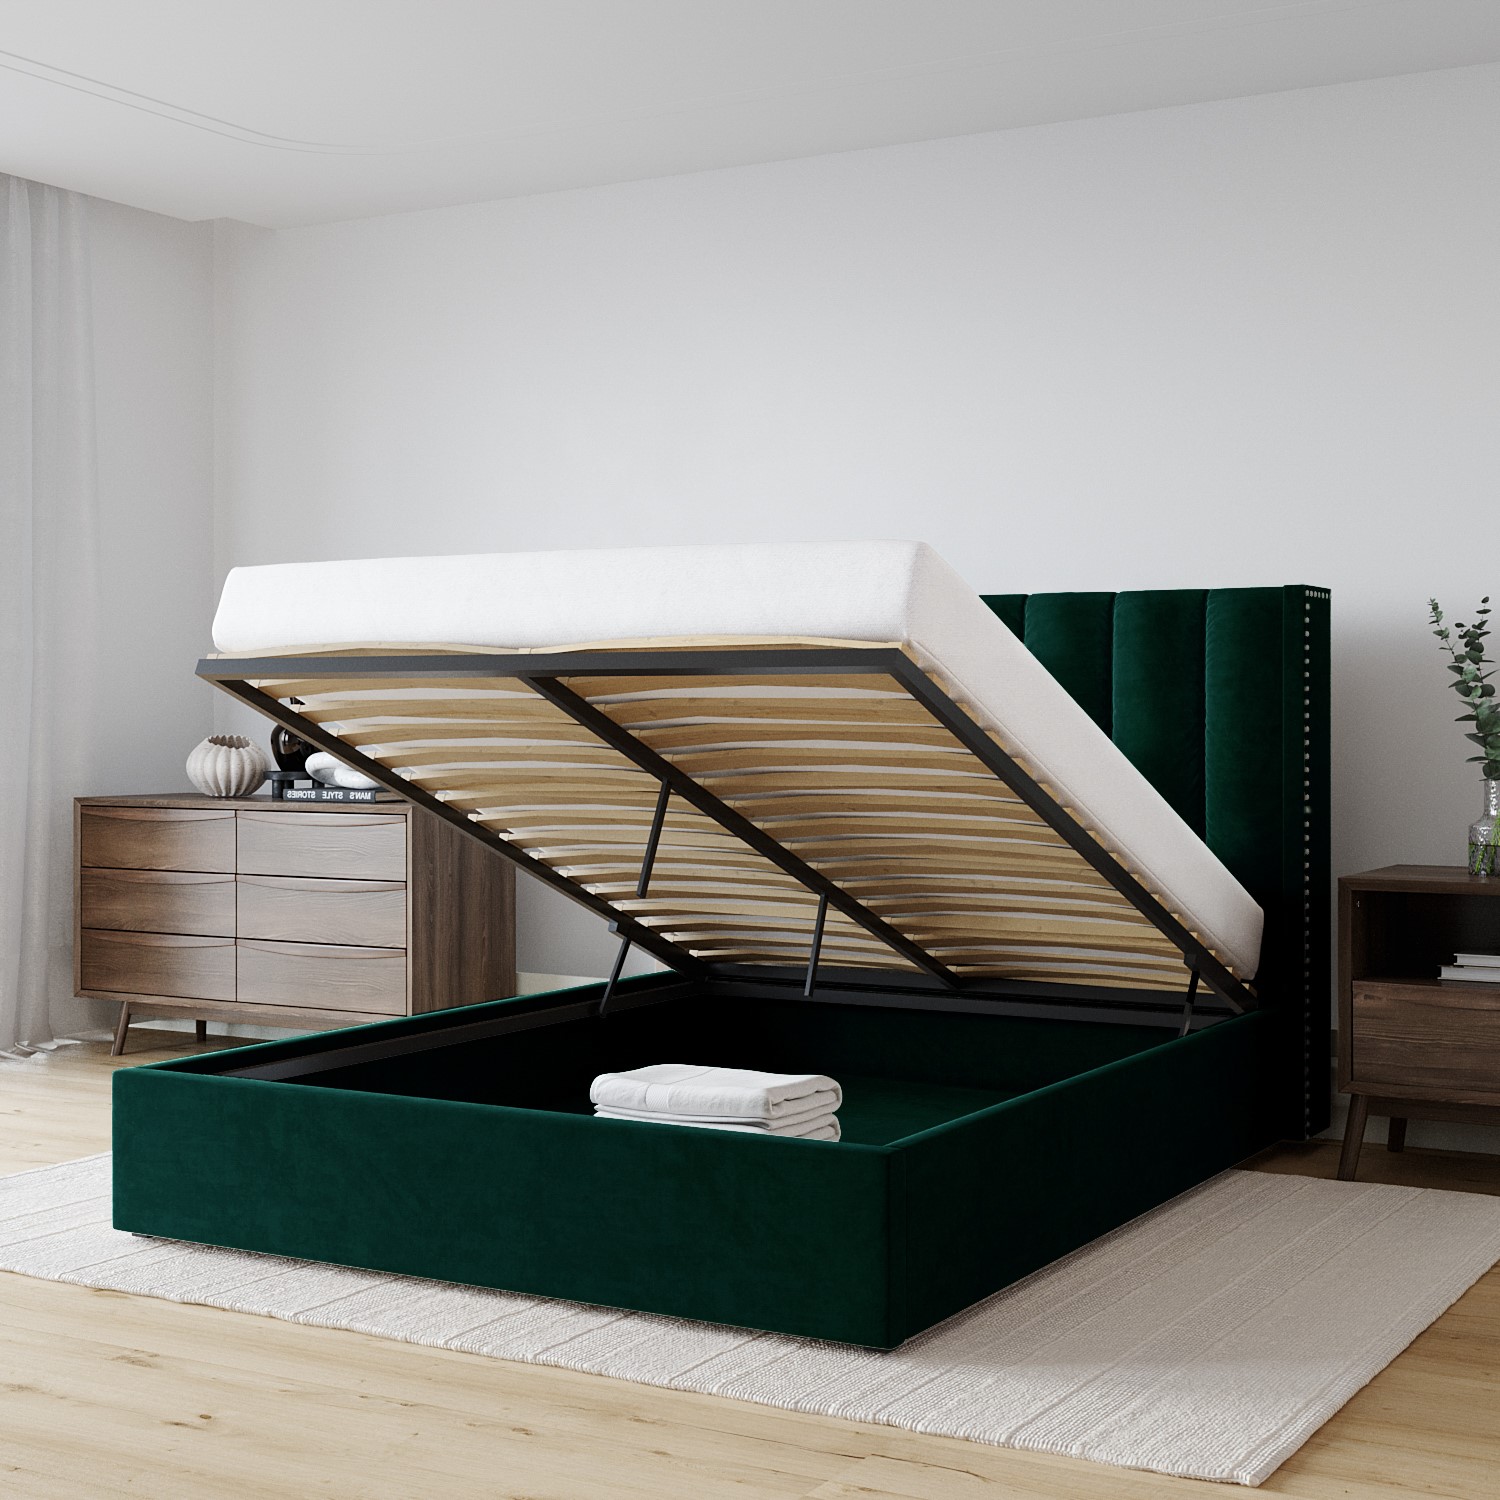 Read more about Green velvet king size ottoman bed with winged headboard maddox